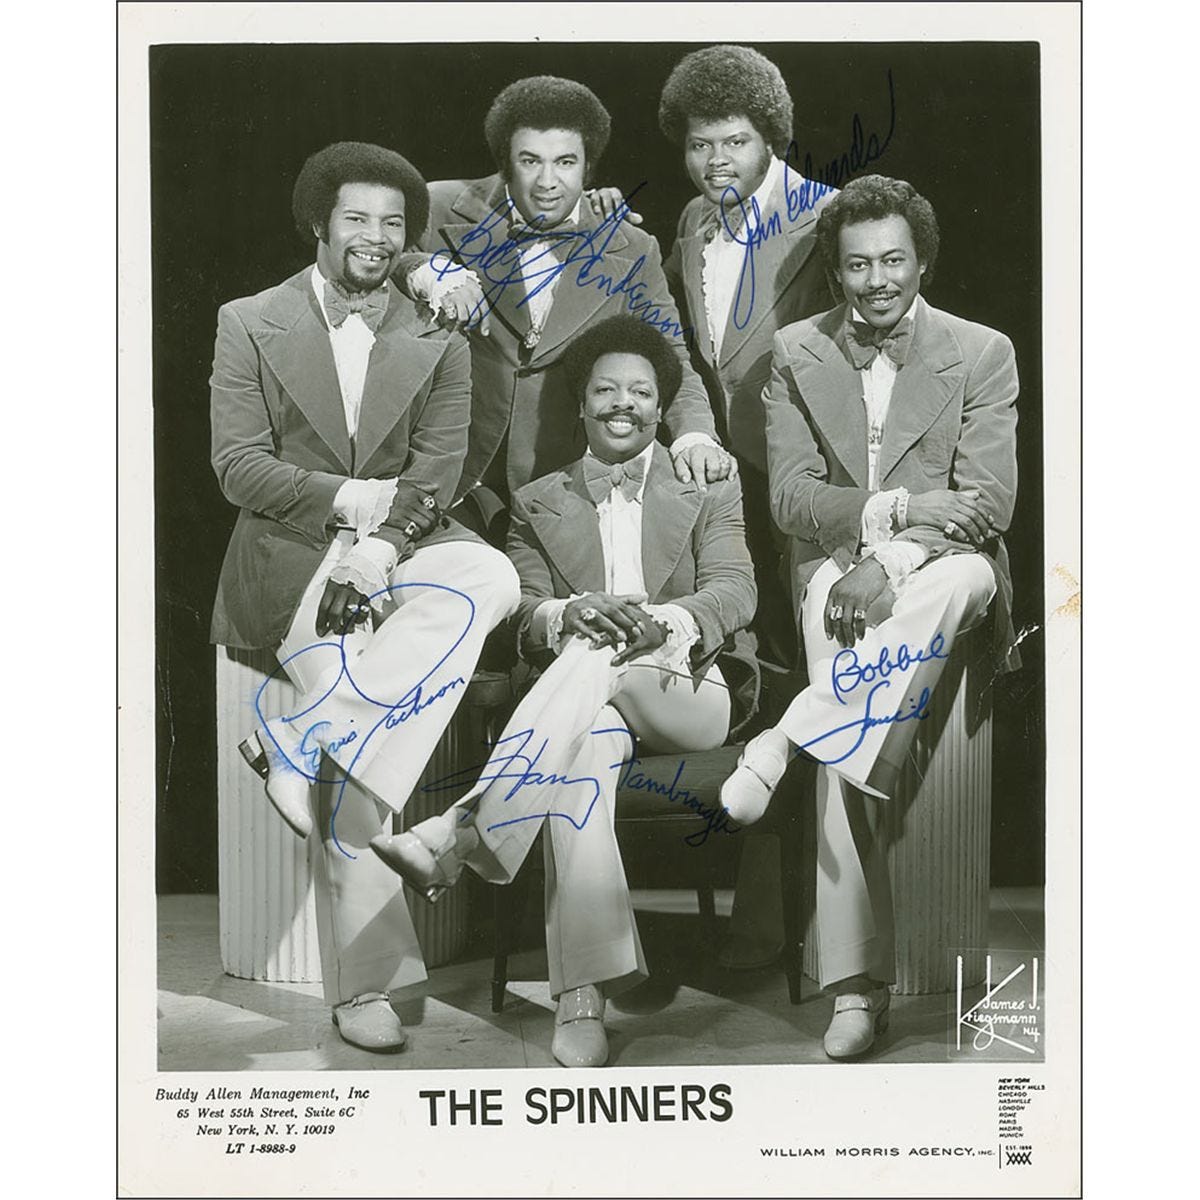 Bobbie Smith: The Signature Voice of The Spinners, Motown Greats